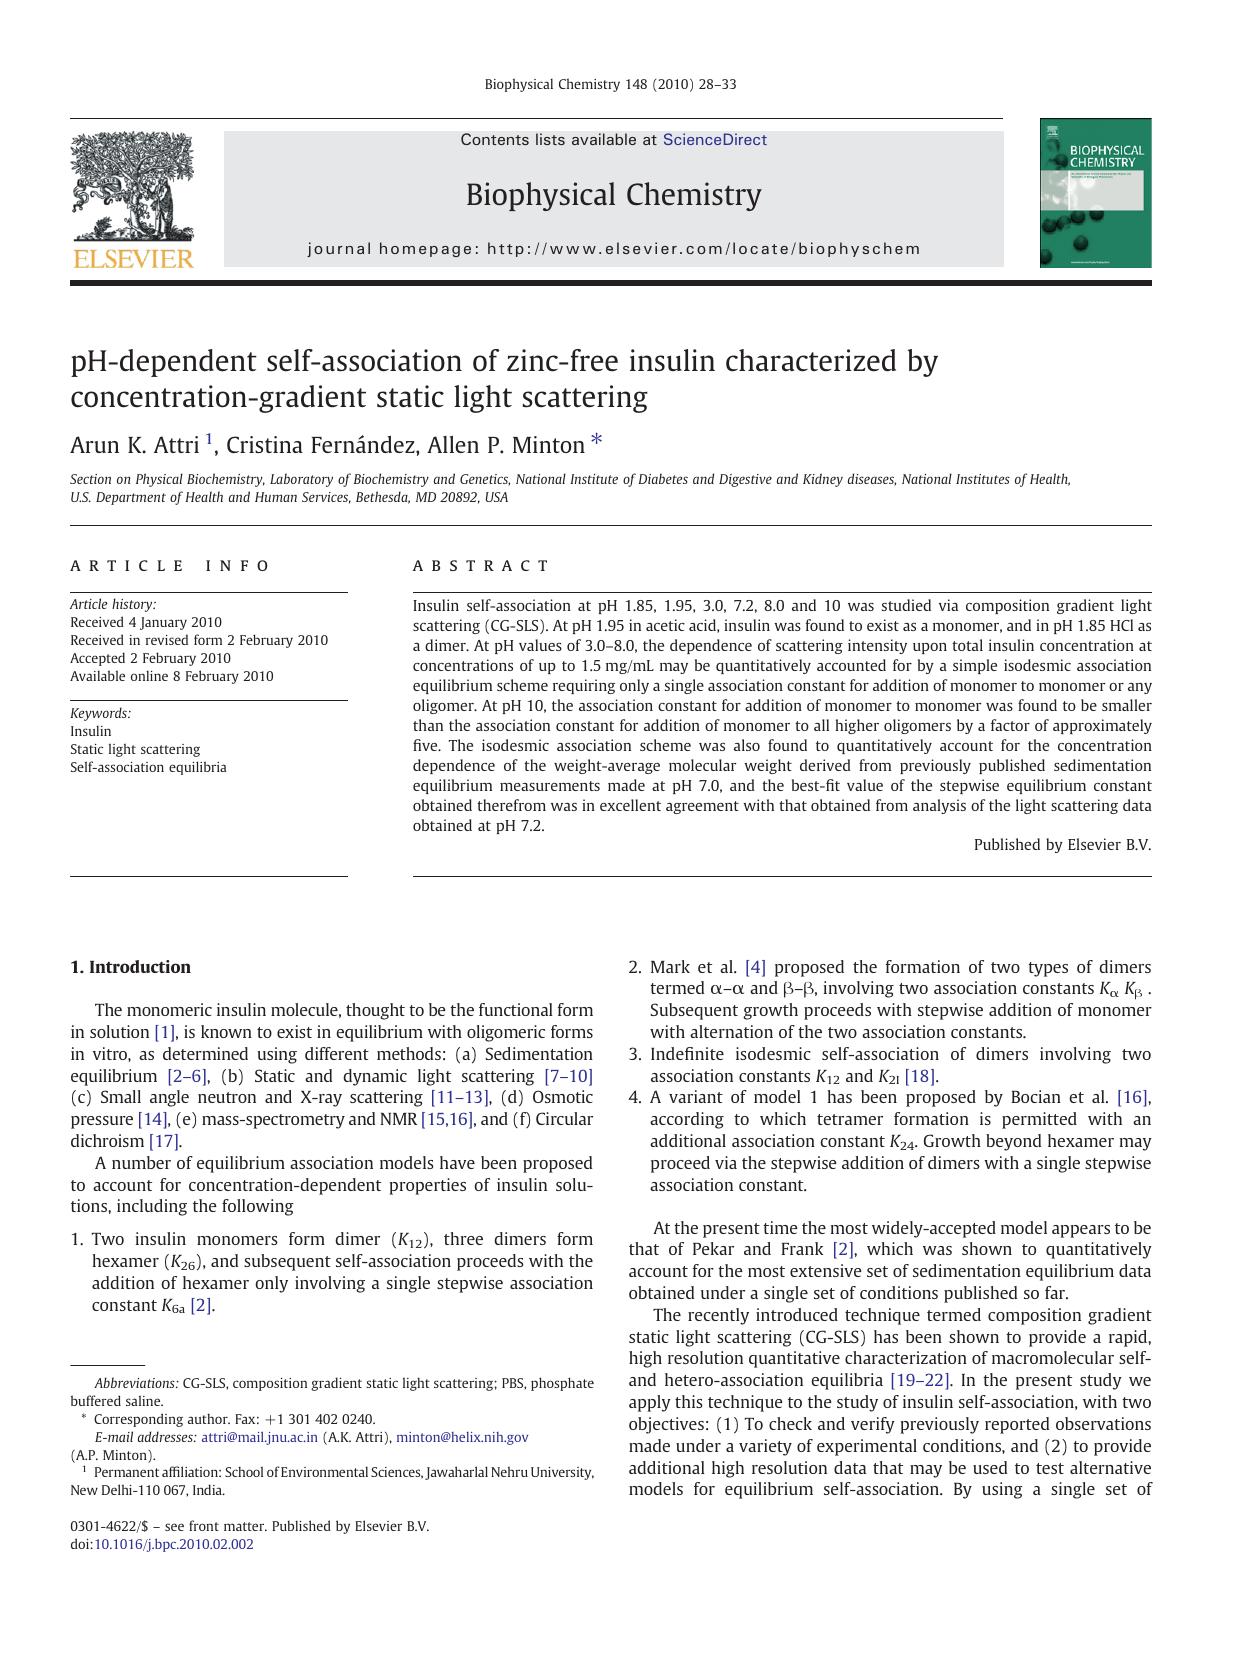 pH-dependent self-association of zinc-free insulin characterized by concentration-gradient static light scattering by Arun K. Attri; Cristina Fernández; Allen P. Minton